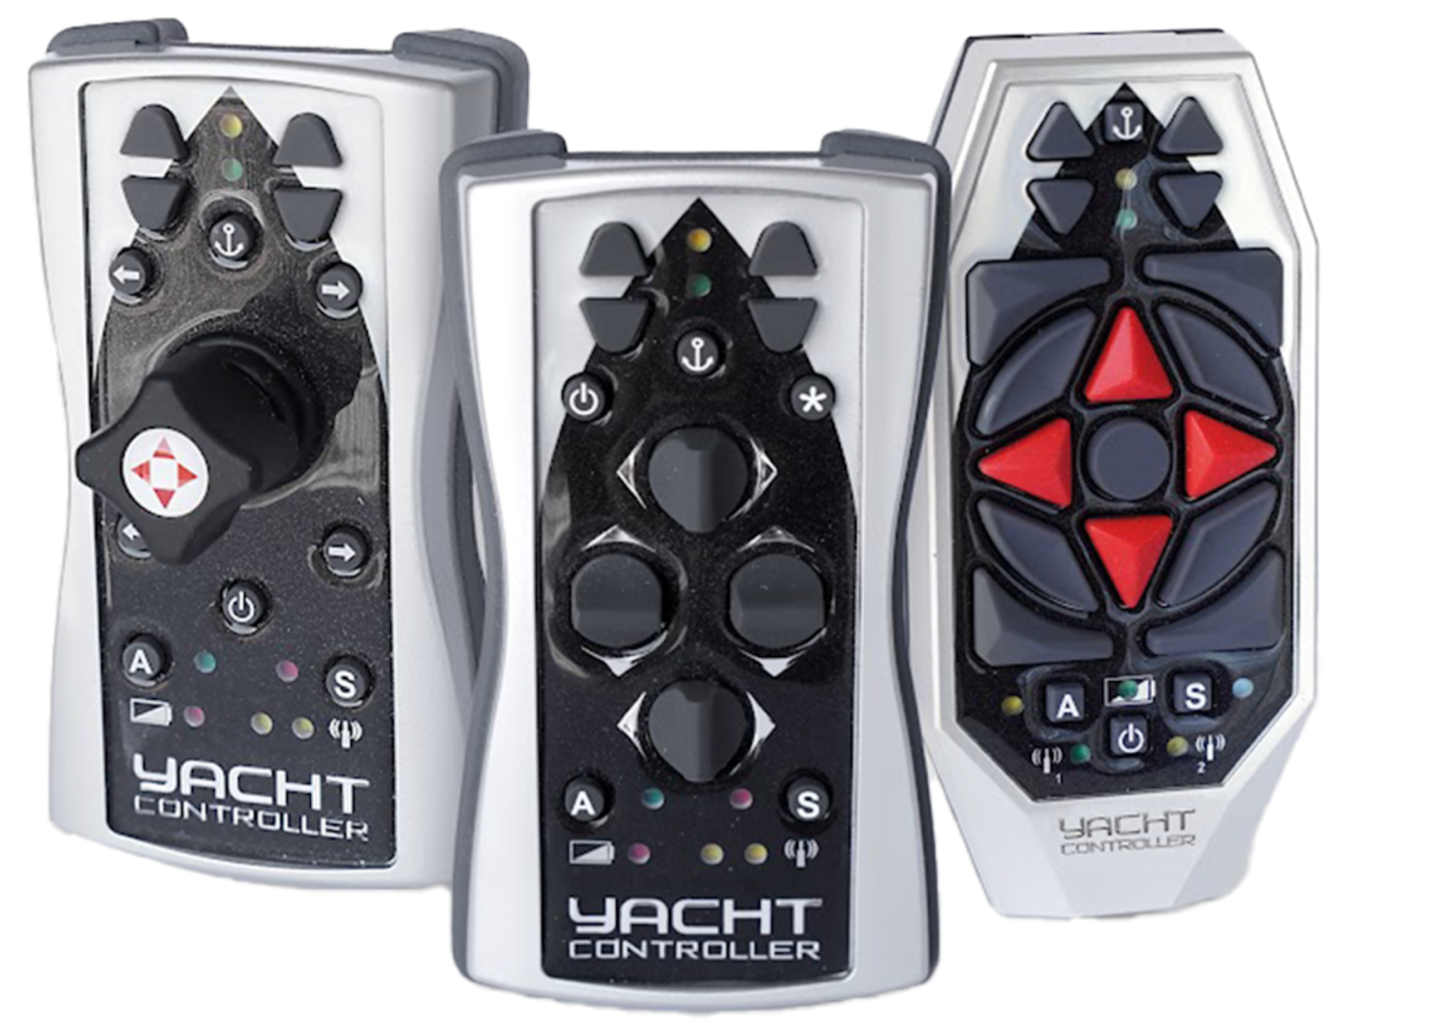 Yacht Controller, the NEMESIS system